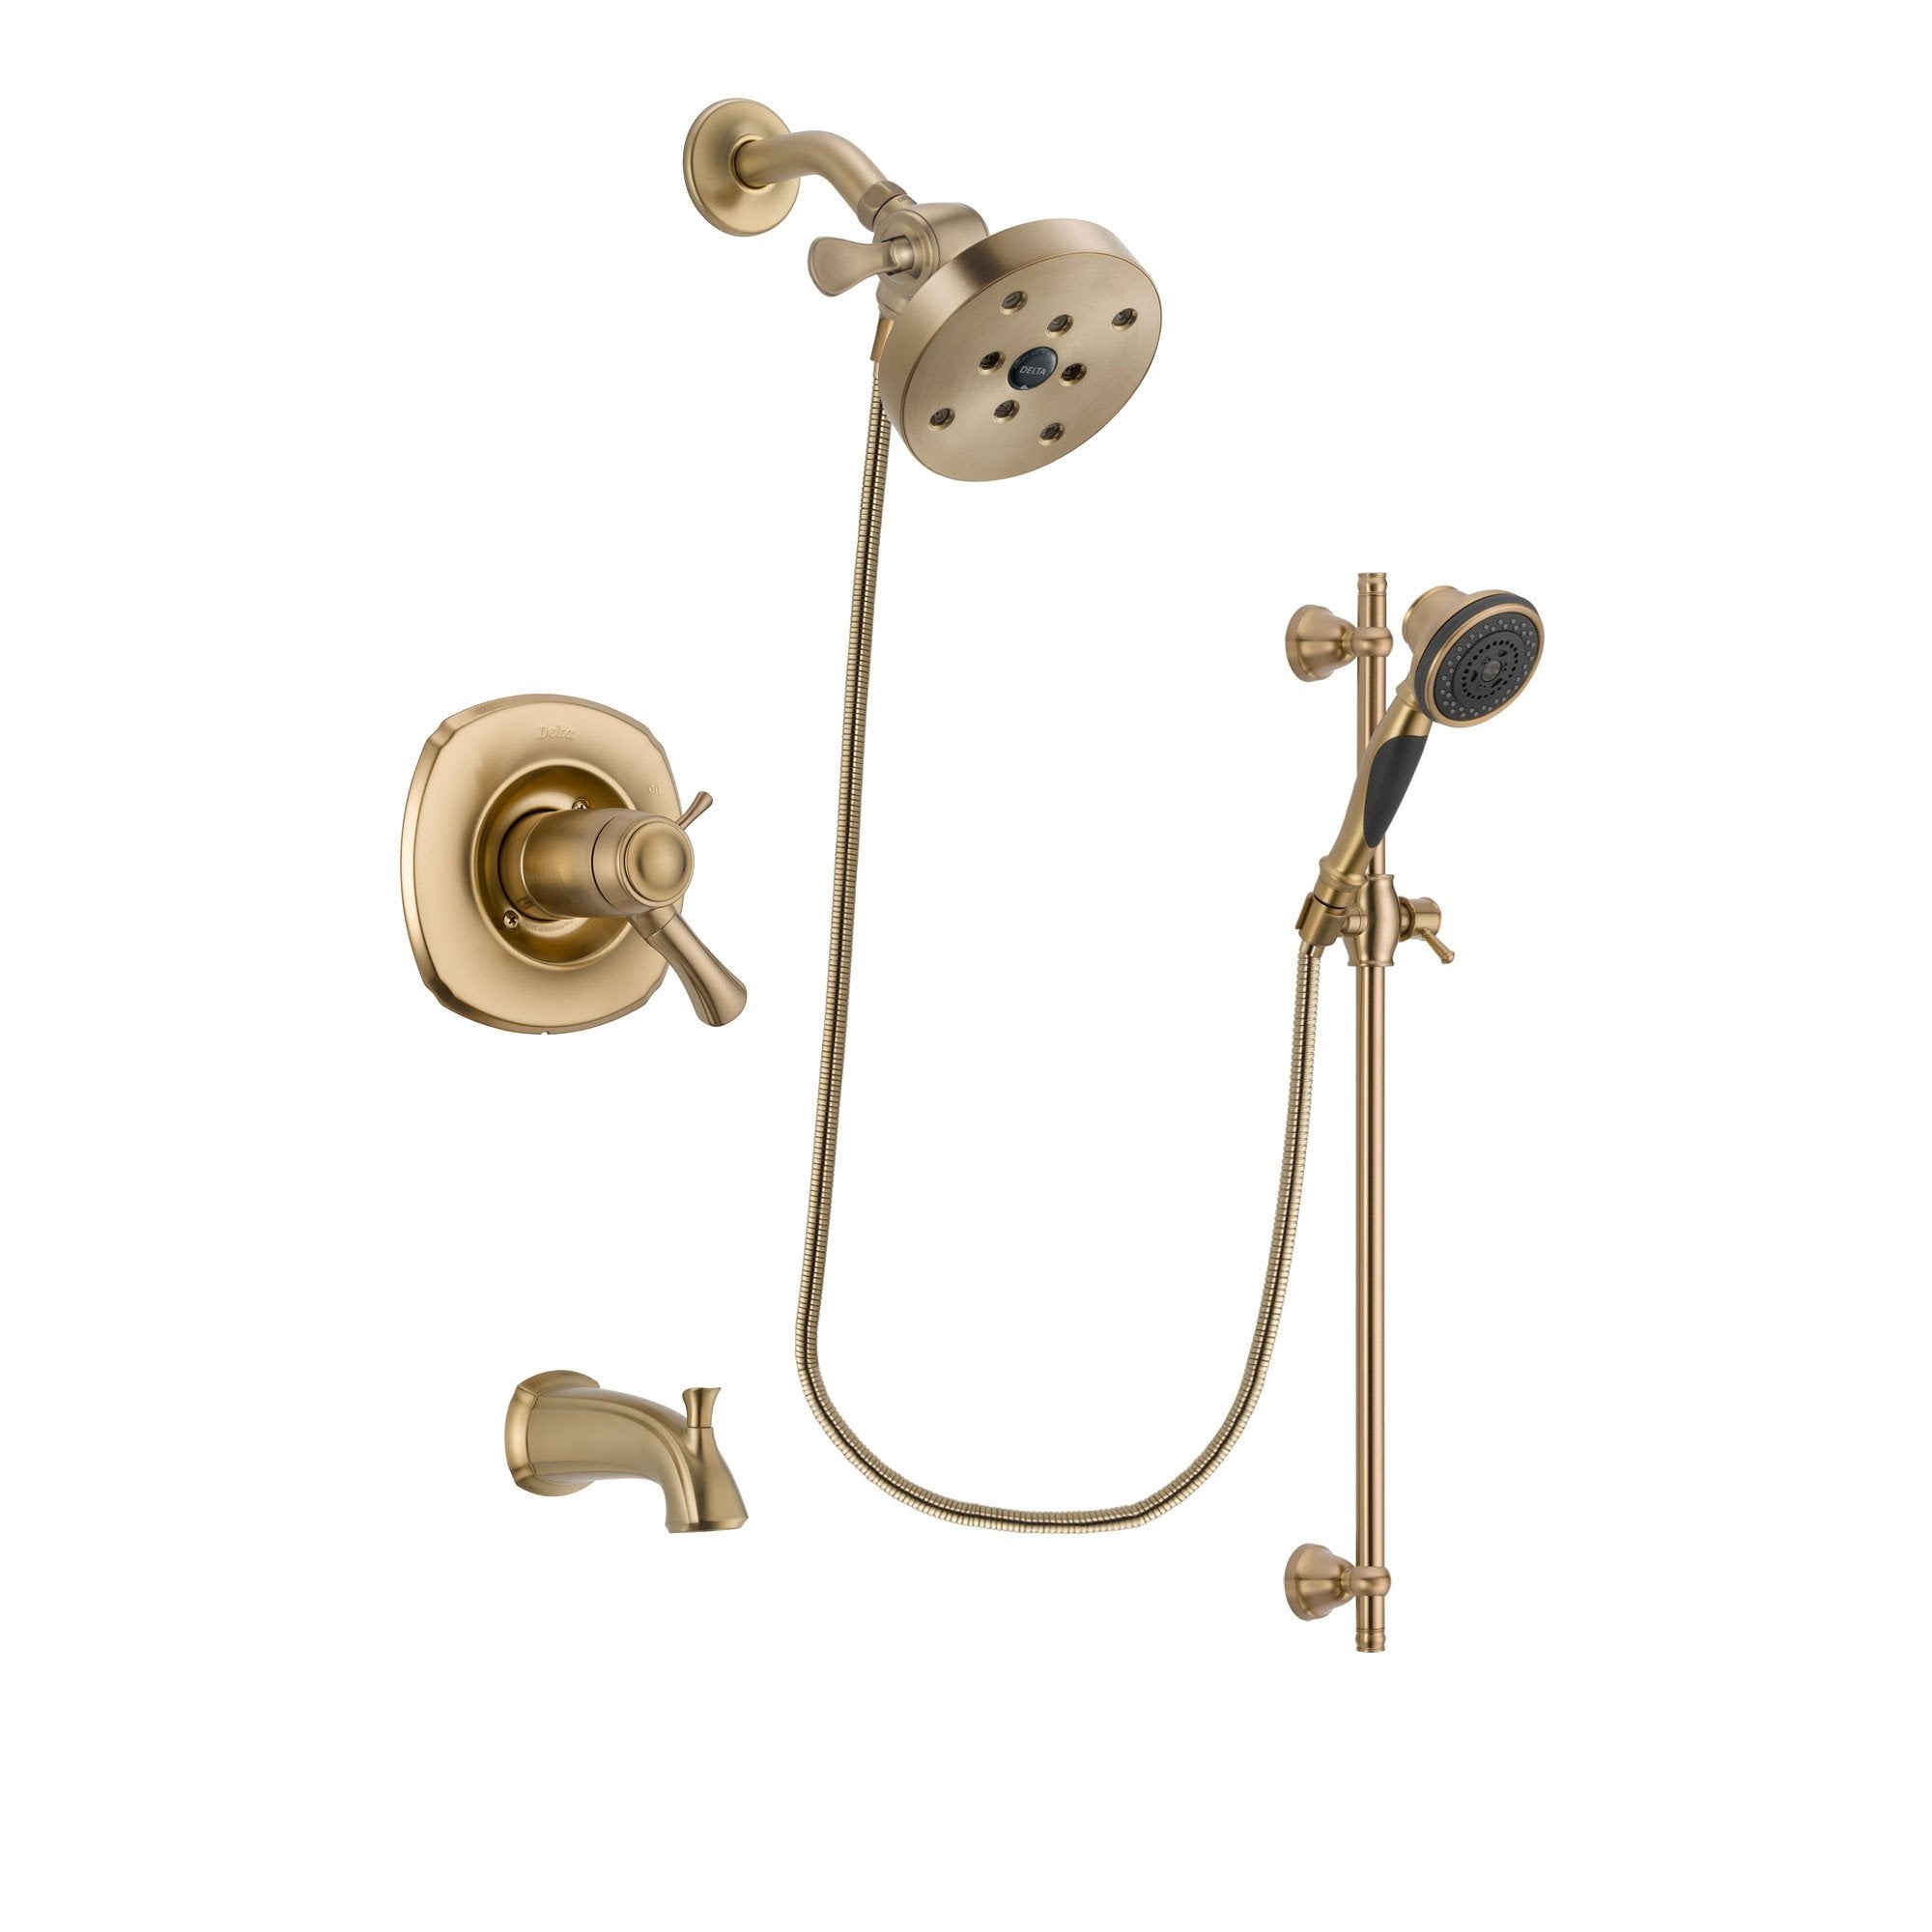 Delta Addison Champagne Bronze Finish Thermostatic Tub and Shower Faucet System Package with 5-1/2 inch Showerhead and Personal Handheld Shower Spray with Slide Bar Includes Rough-in Valve and Tub Spout DSP3607V